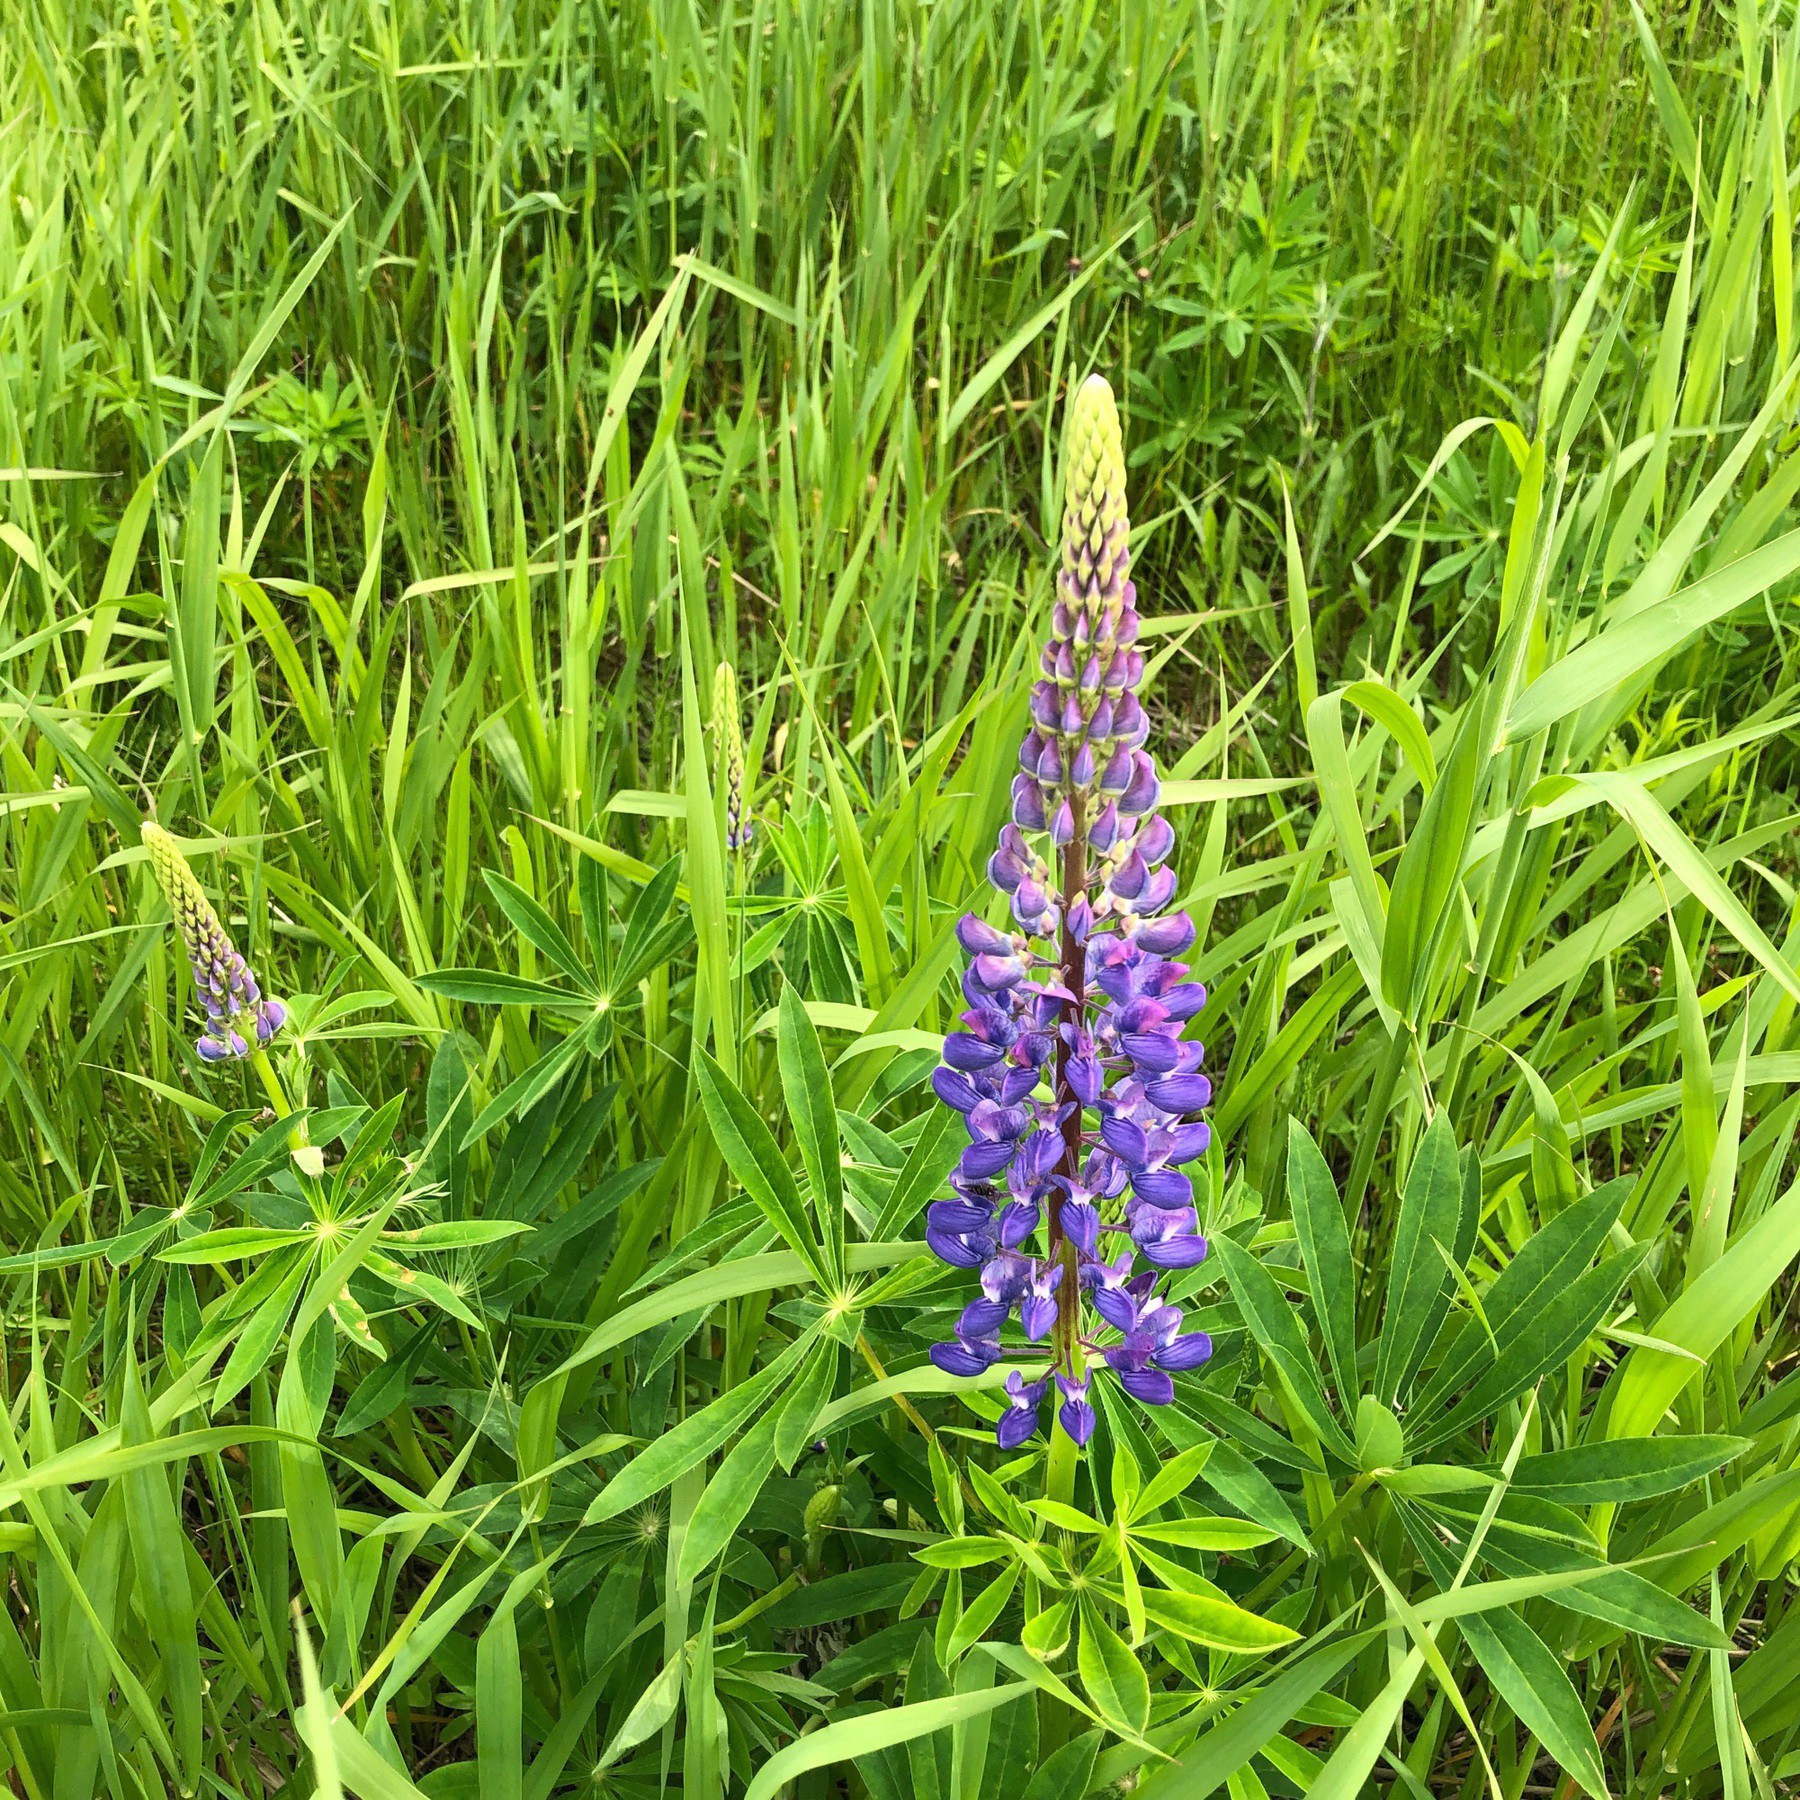 Lupin and grass.